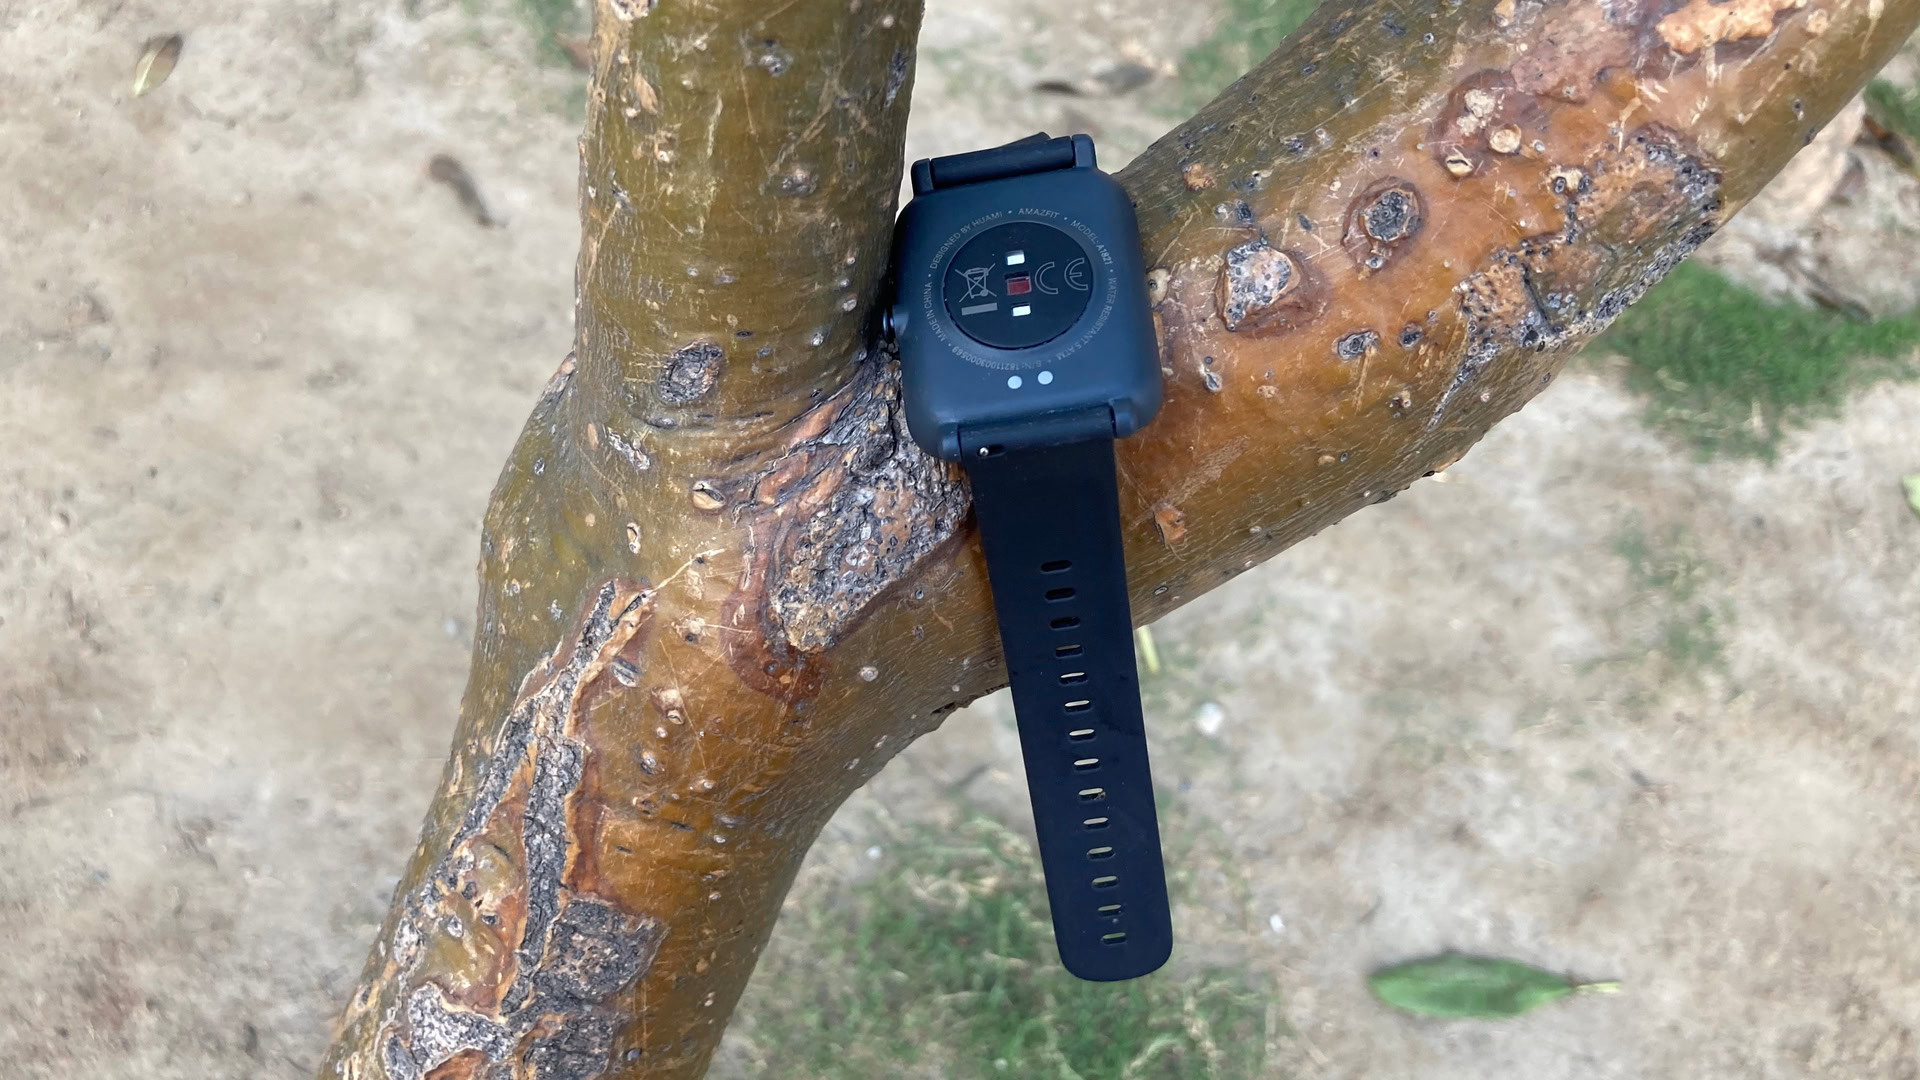 Amazfit Bip S review: A good fitness watch marred by bad